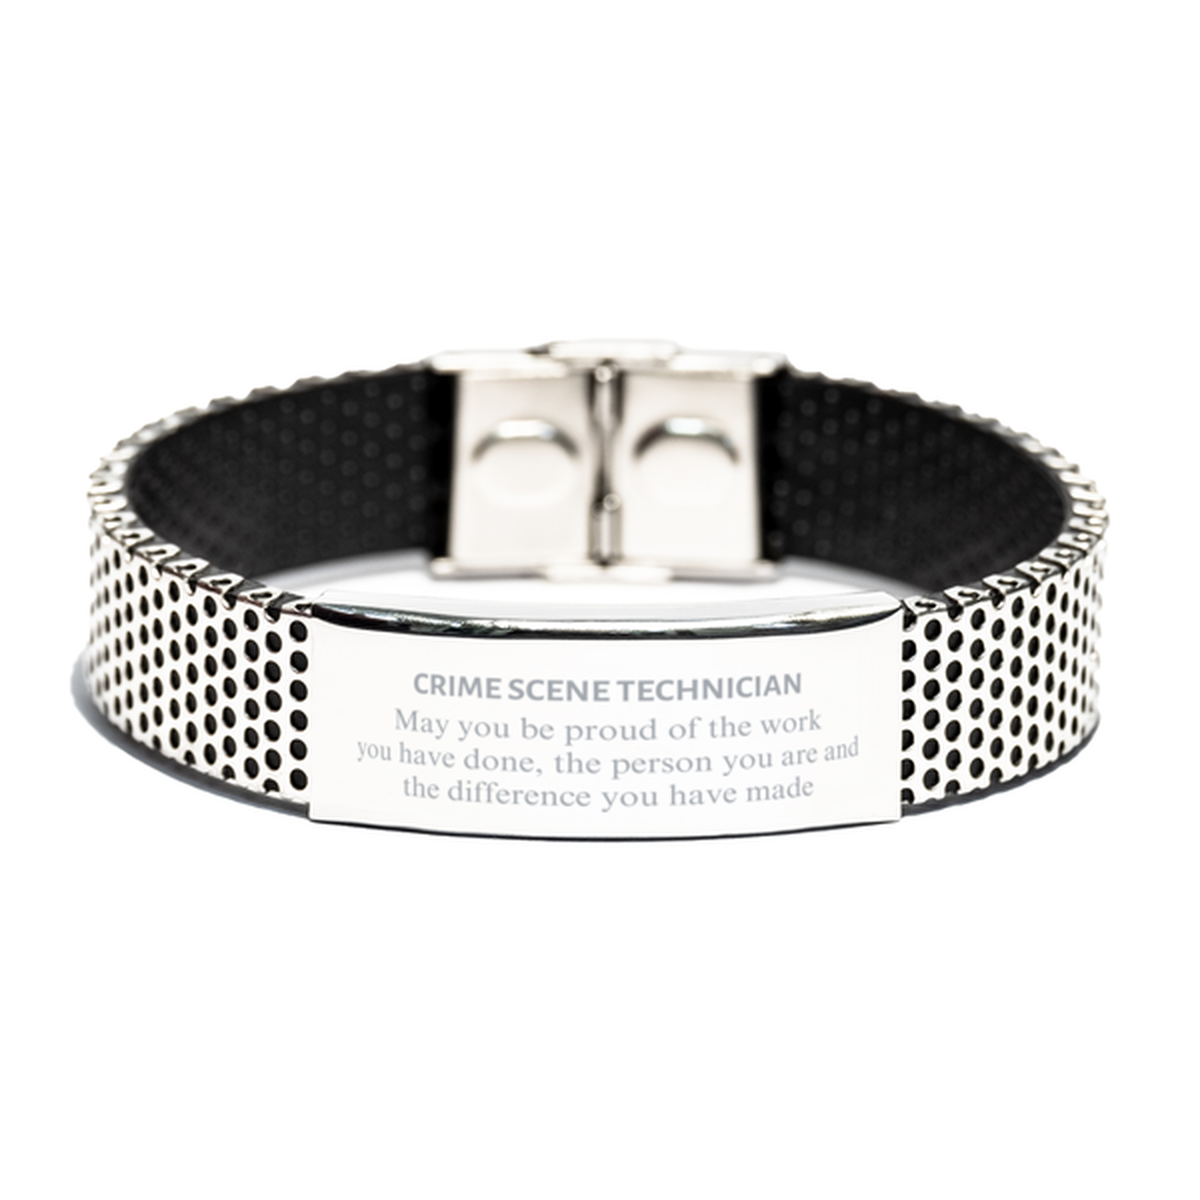 Crime Scene Technician May you be proud of the work you have done, Retirement Crime Scene Technician Stainless Steel Bracelet for Colleague Appreciation Gifts Amazing for Crime Scene Technician